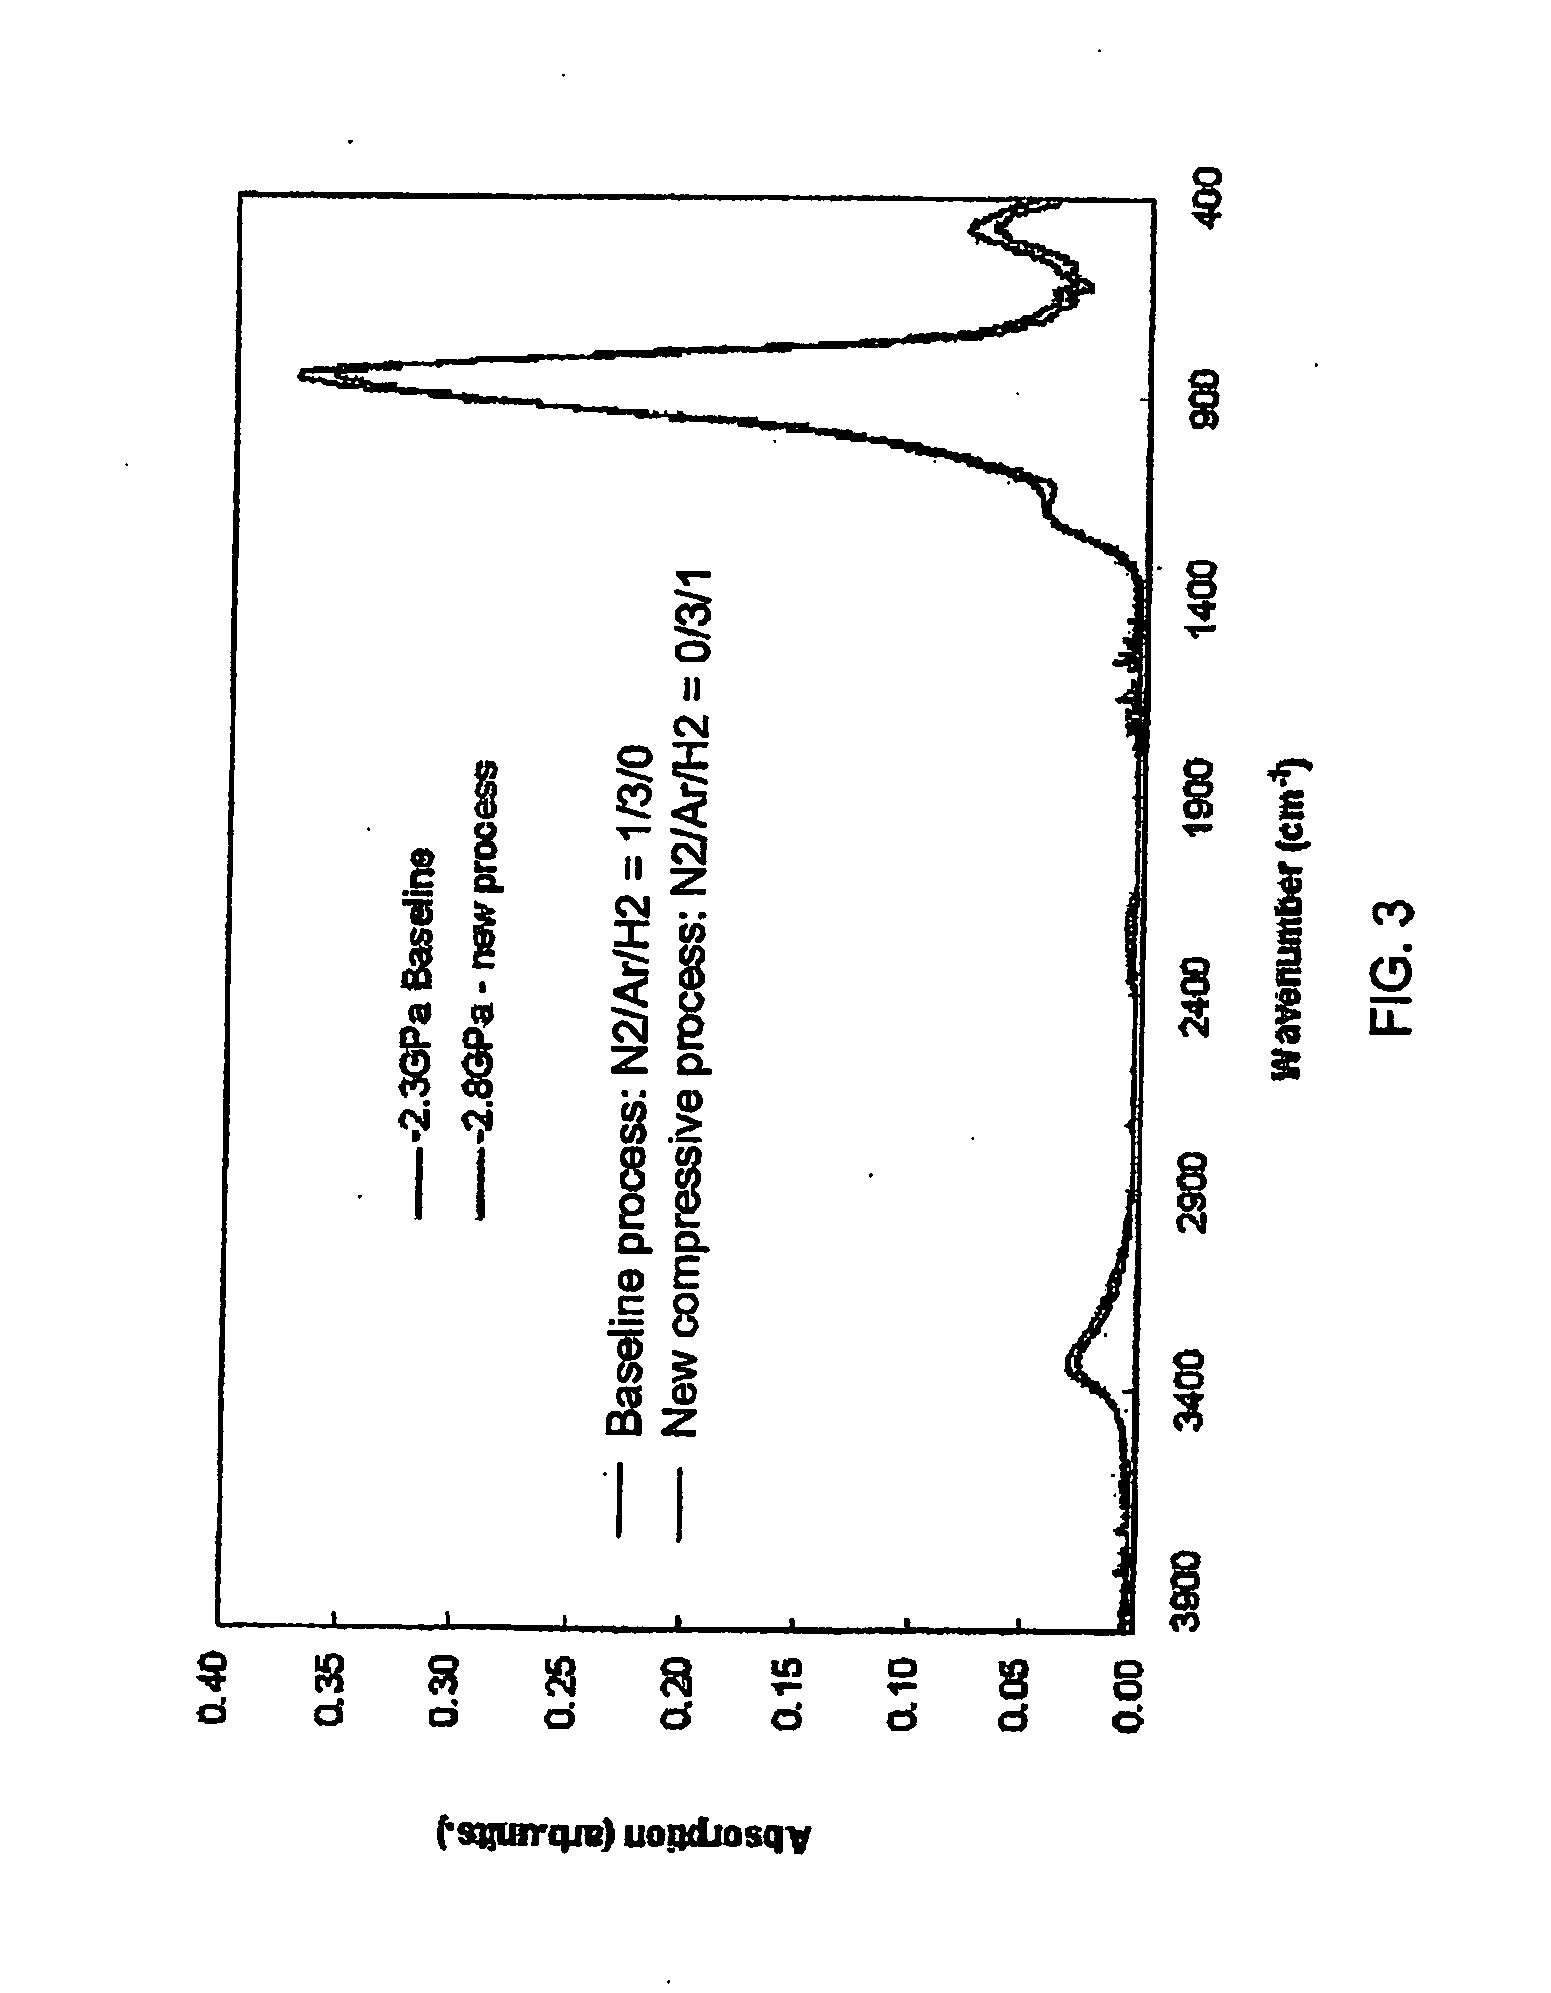 Integration process for fabricating stressed transistor structure